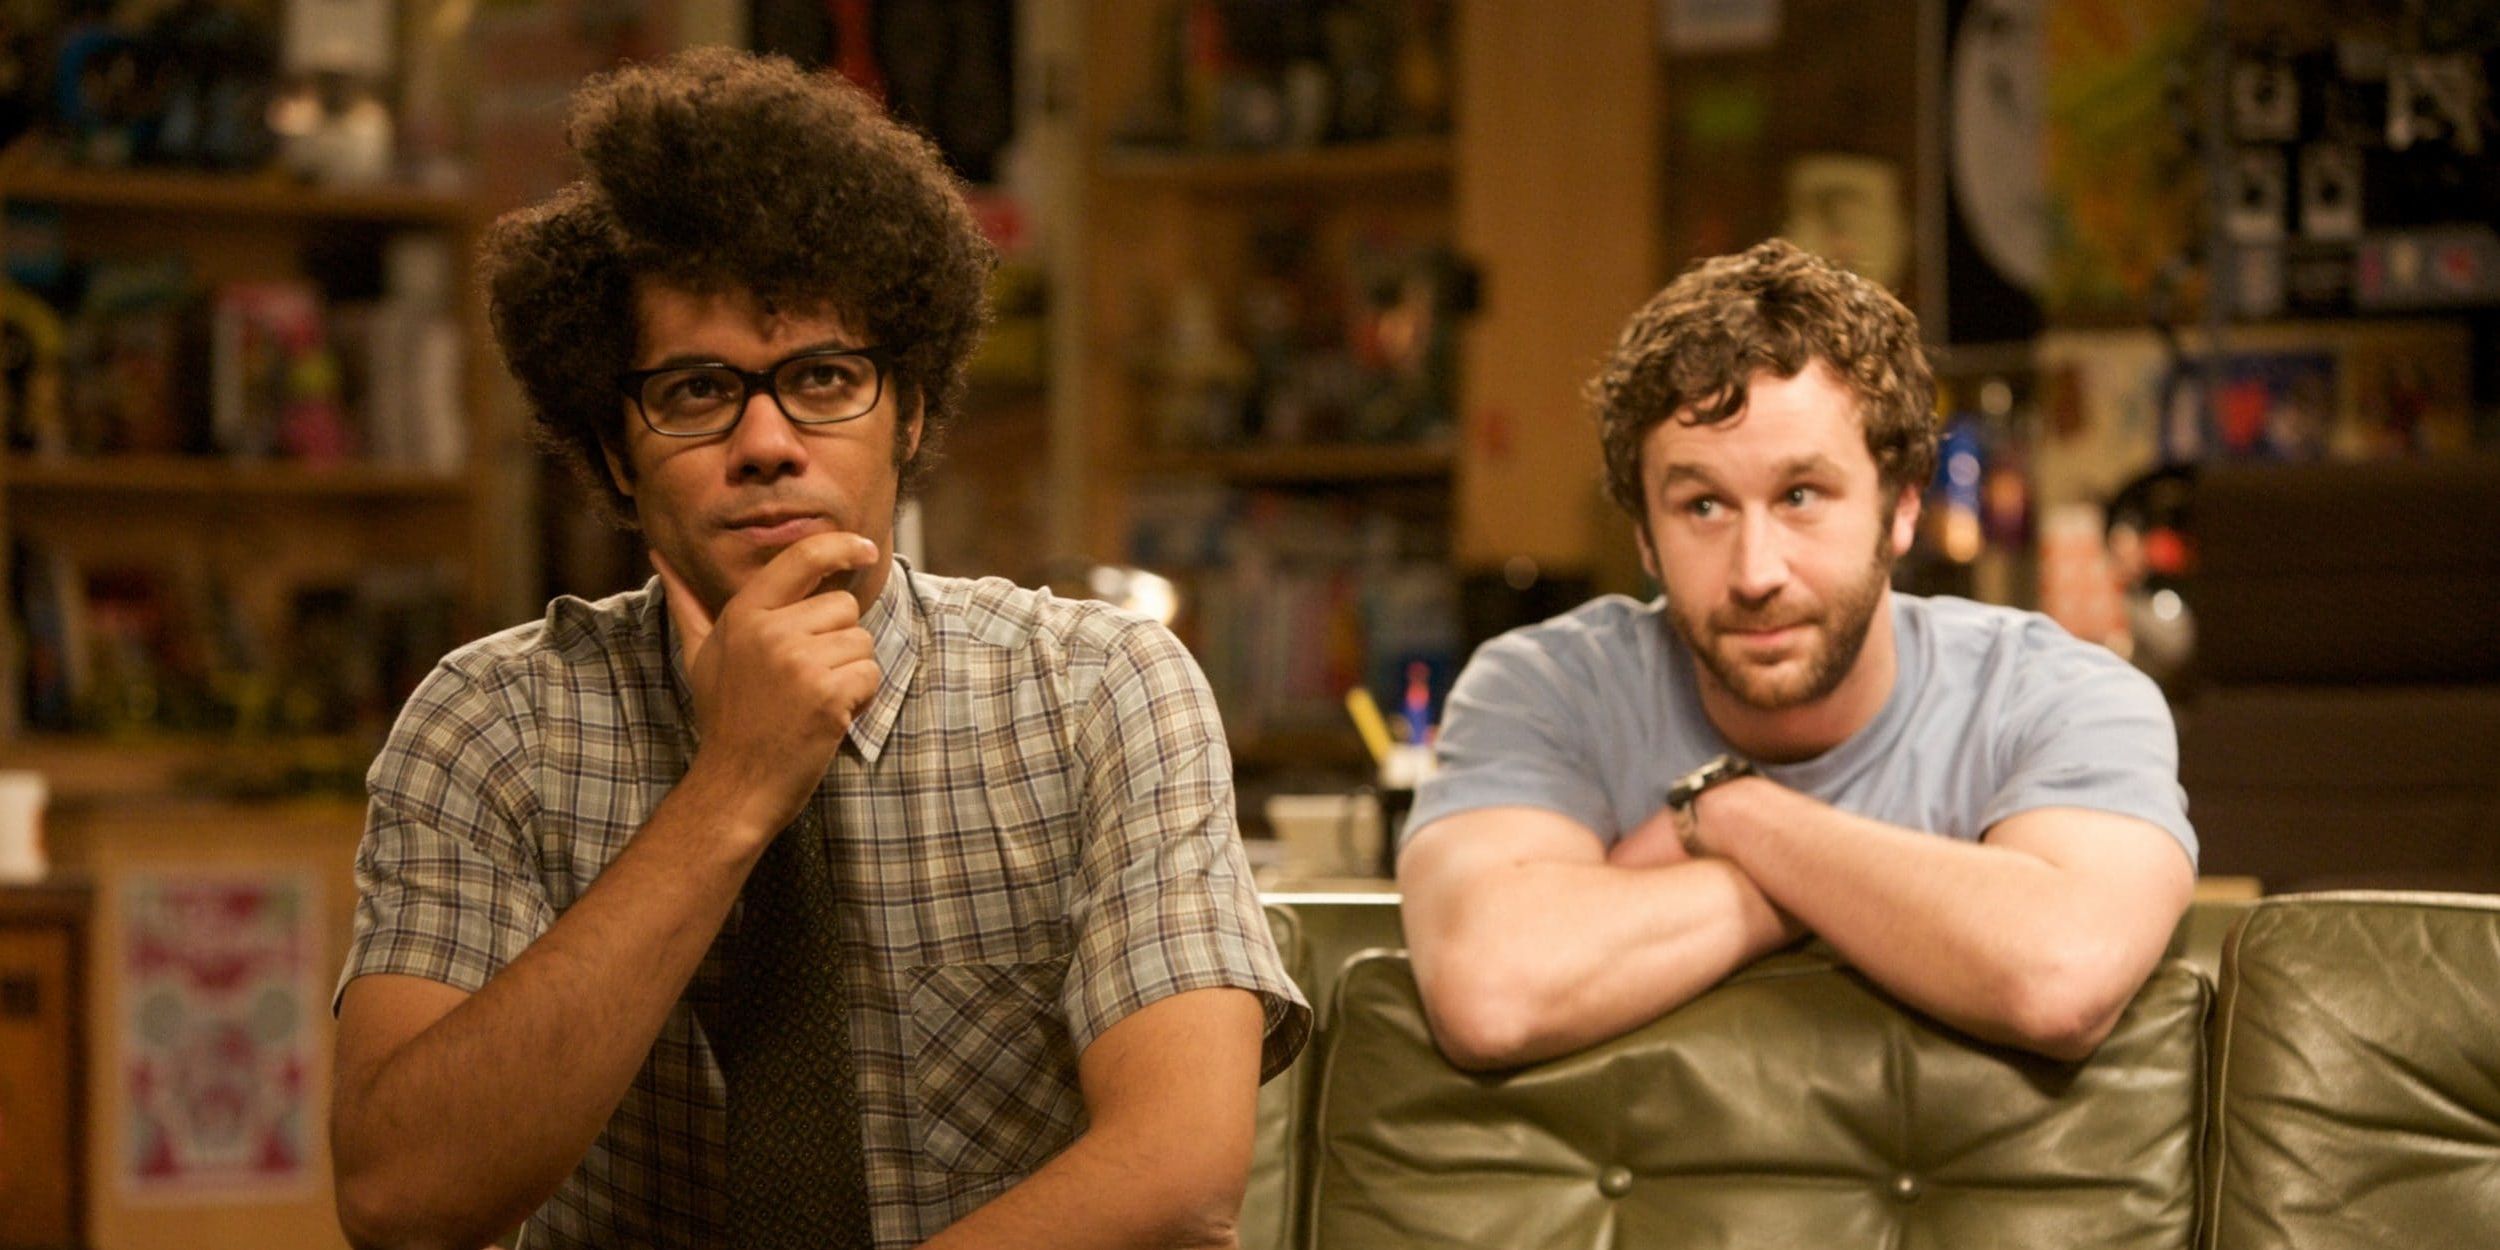 Richard Ayoade as Moss and Chris O'Dowd as Roy in The IT Crowd